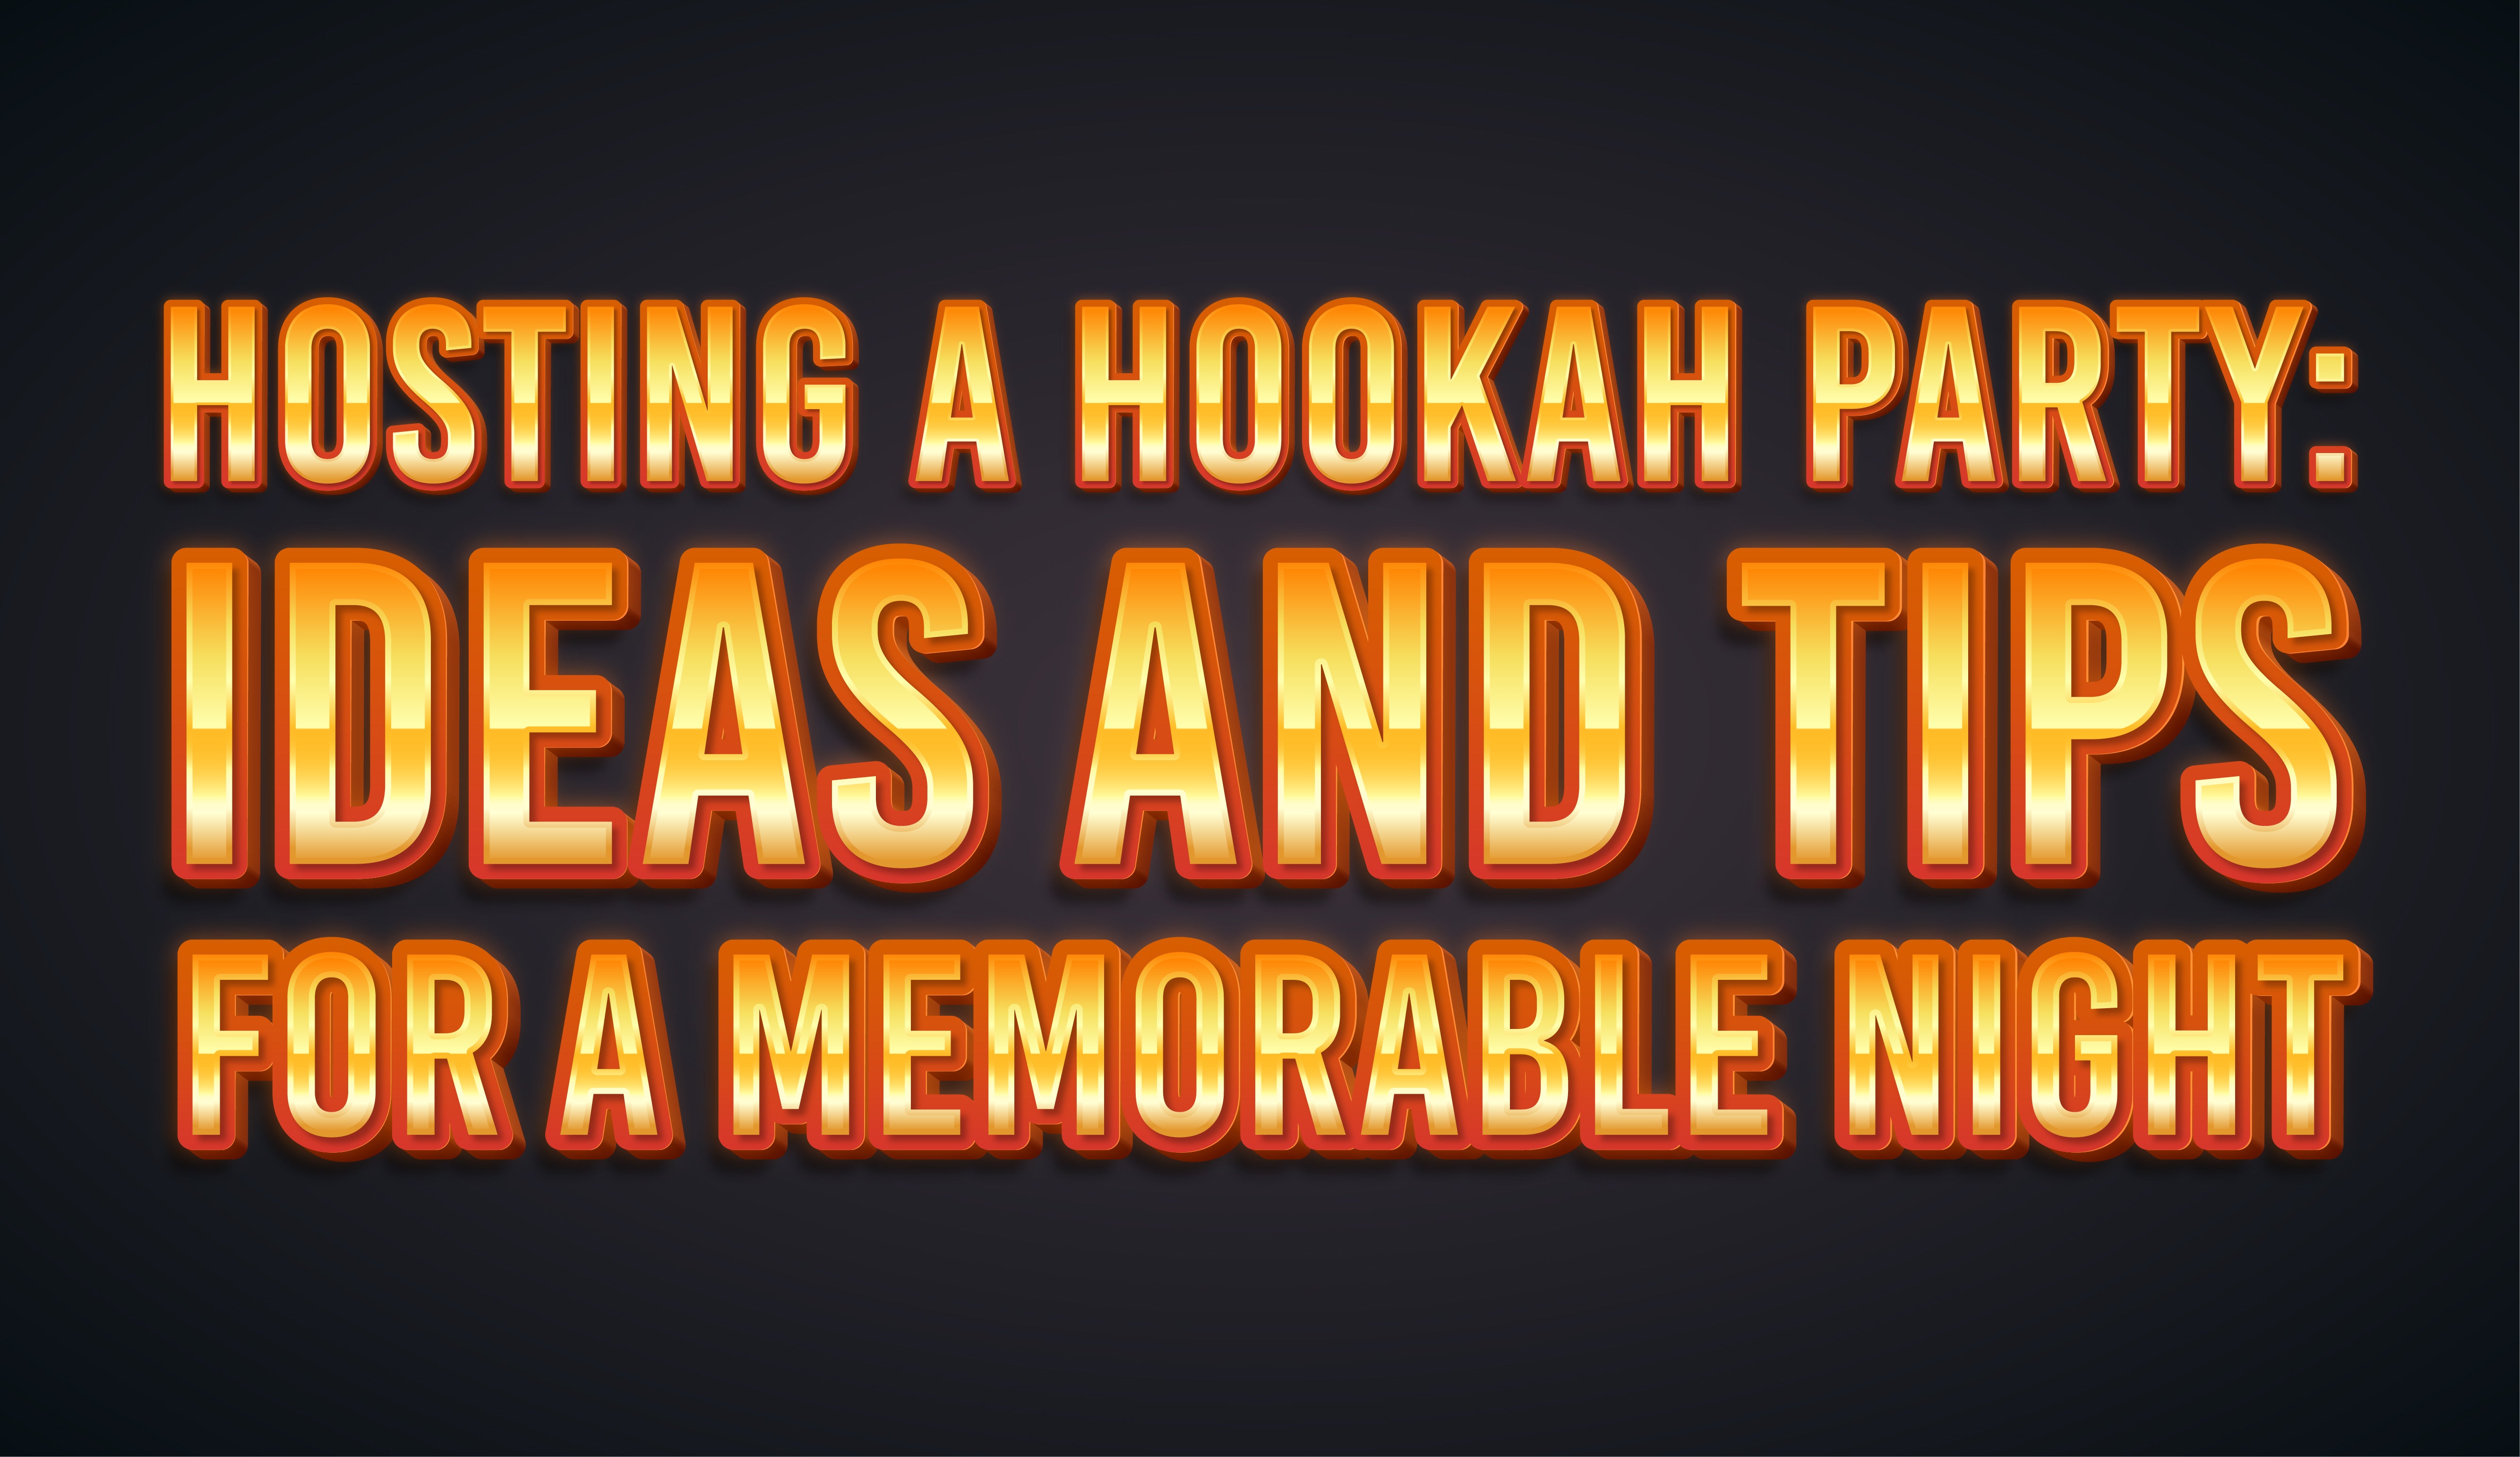 Hosting a Hookah Party: Ideas and Tips for a Memorable Night